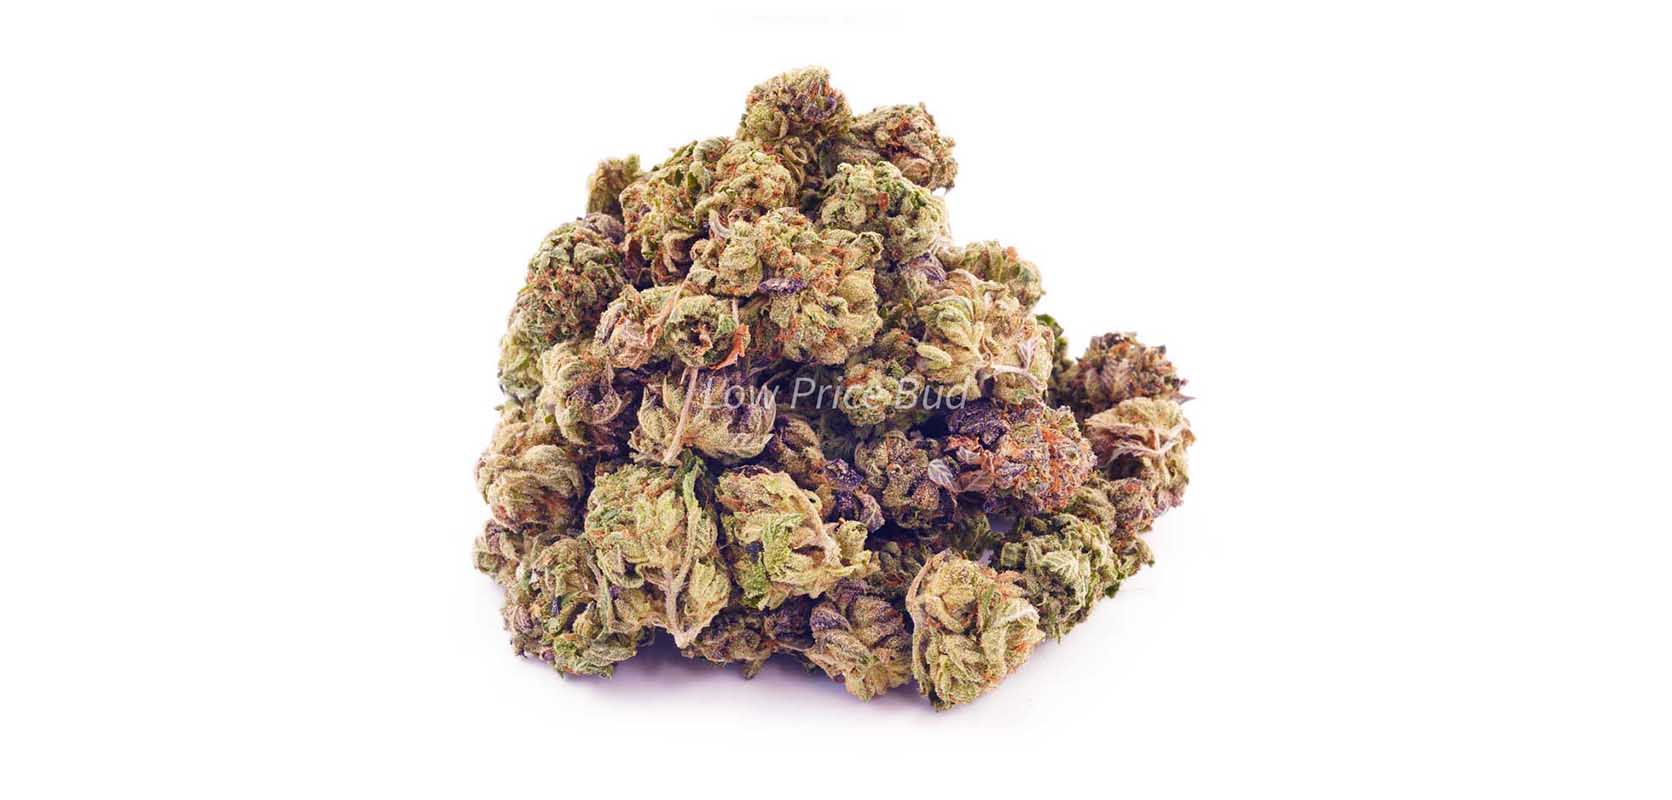 Blue Venom weed online Canada from Low Price Bud online dispensary for mail order marijuana BC cannabis.